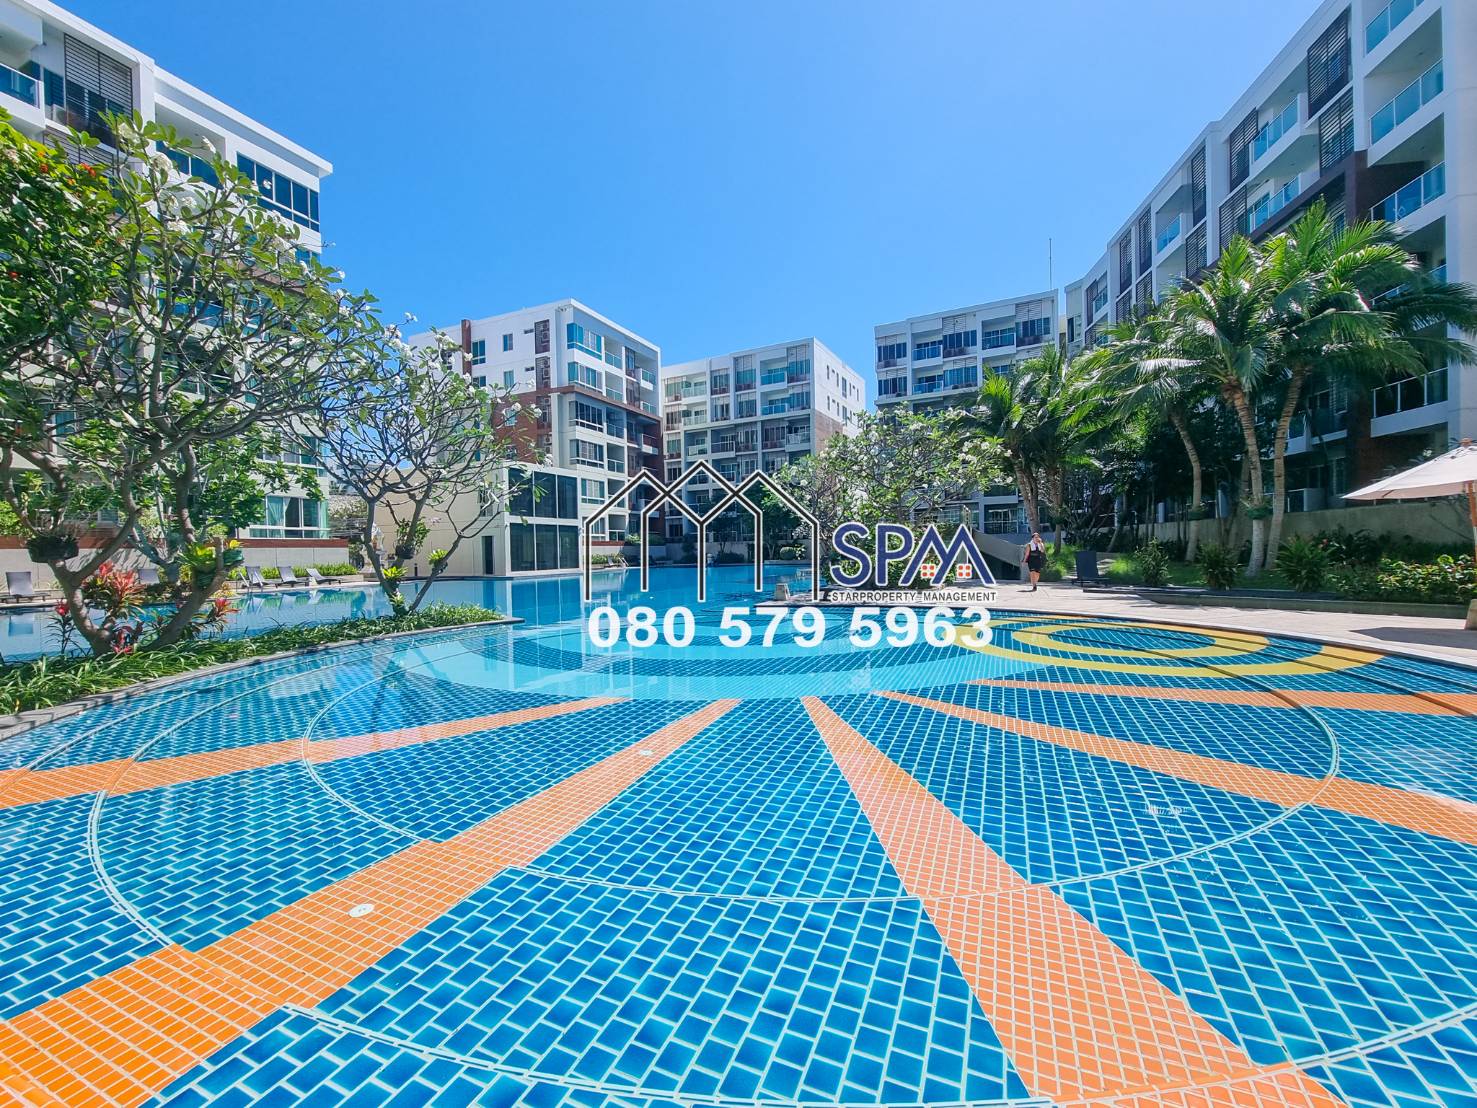 Hot Deal 2 Bedrooms,88.12 sq.m. pool view at Seacraze for Sale, price only 4.49 Million Baht